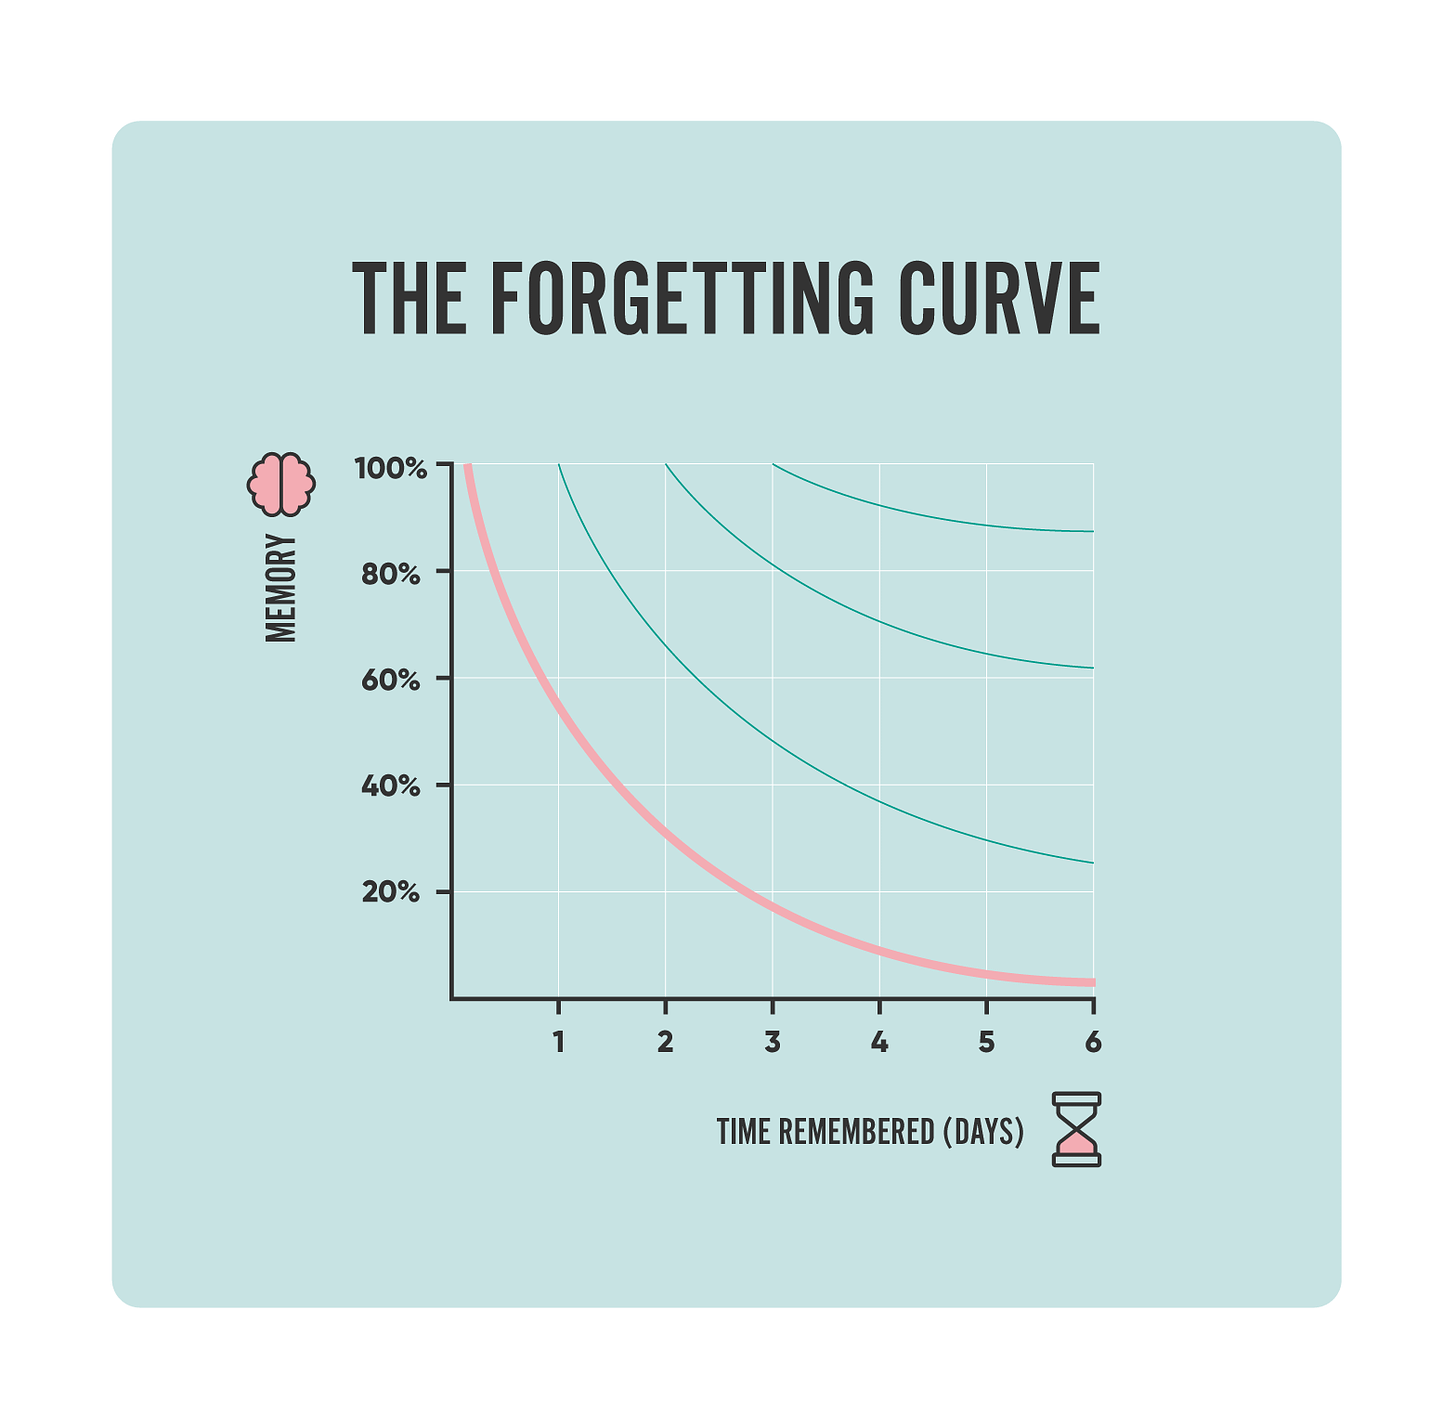 5 Ways to Challenge the Forgetting Curve - LearnUpon